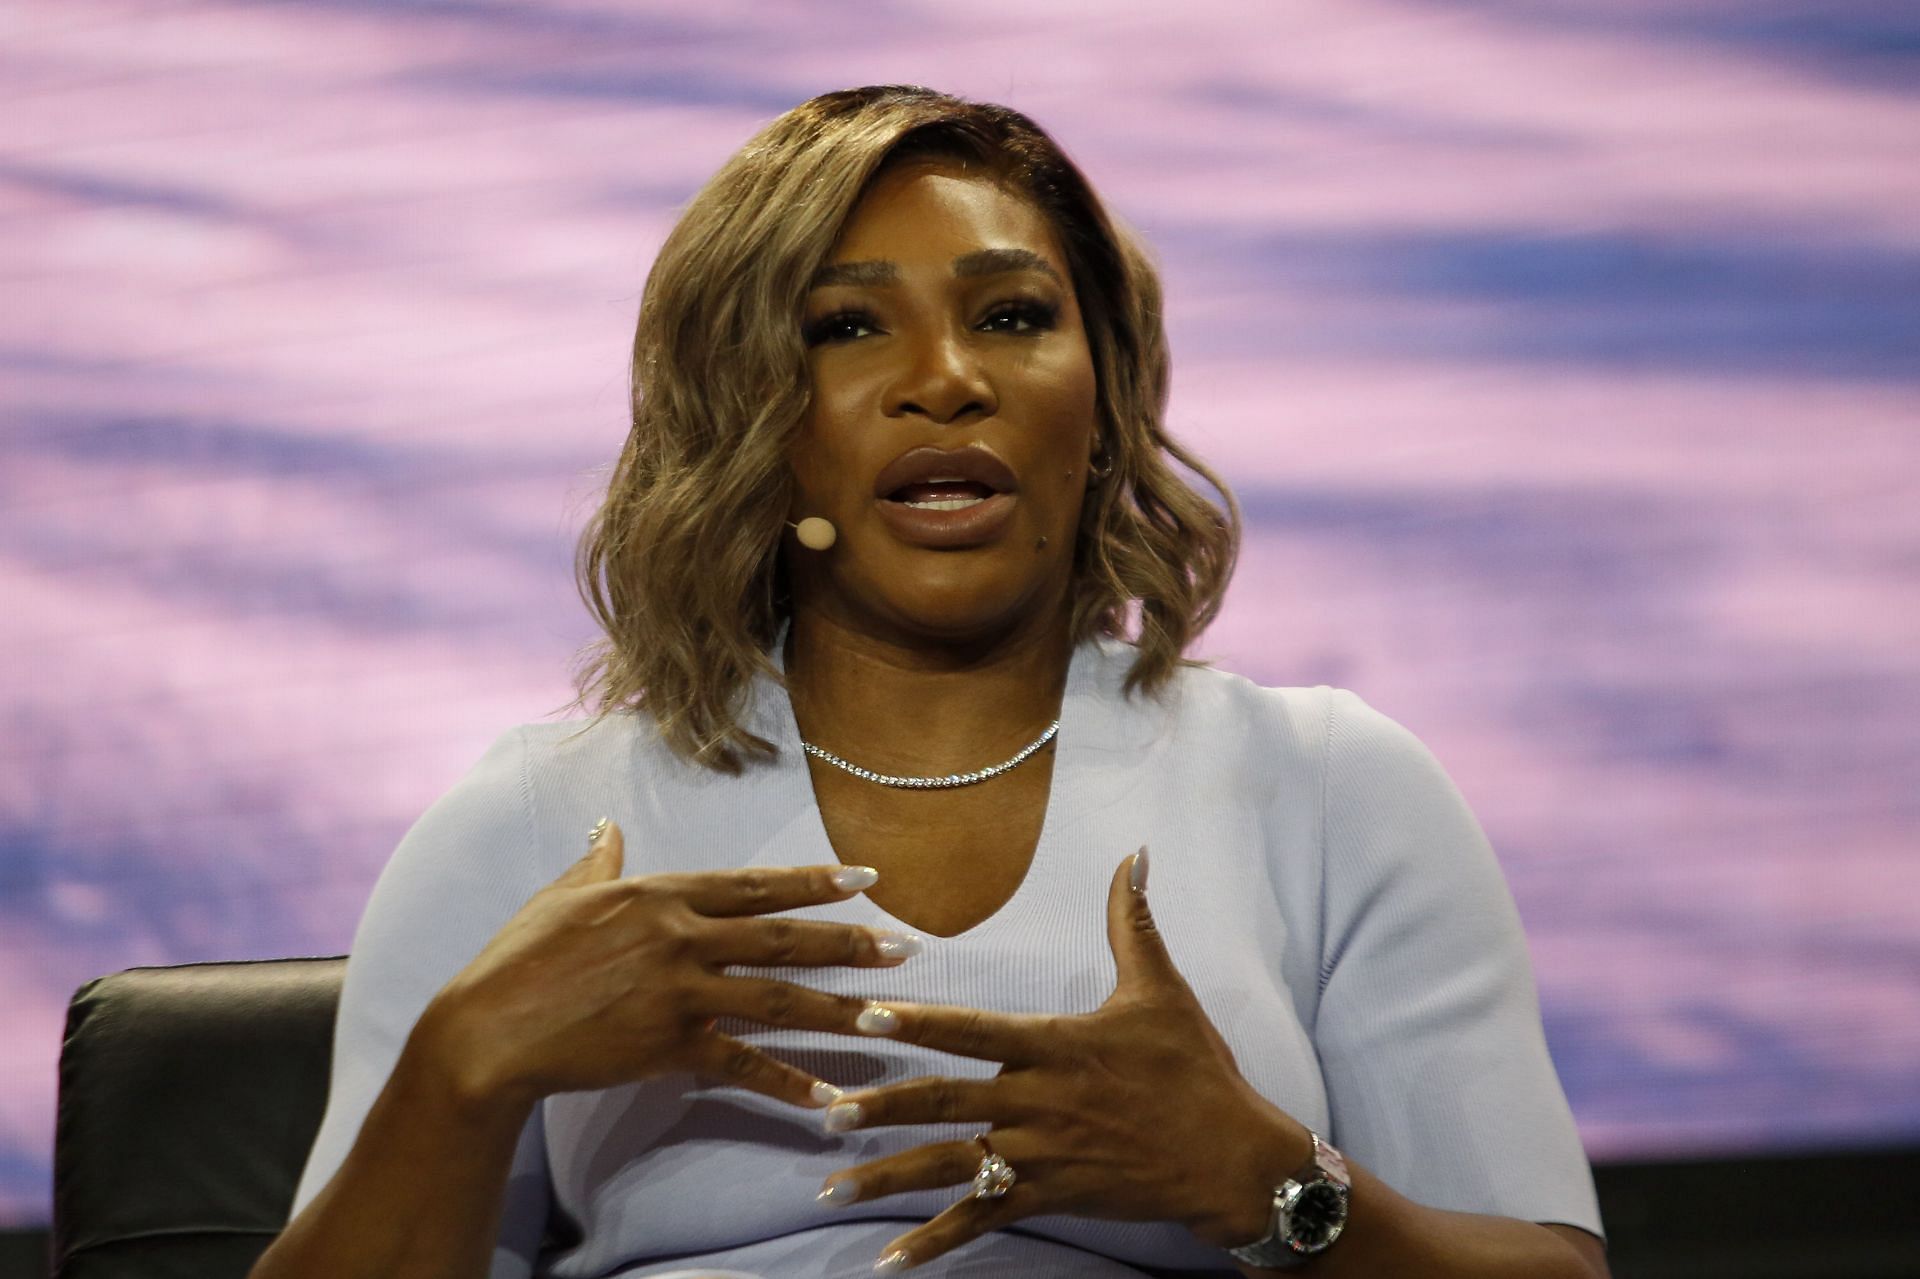 Serena Williams speaks during the Bitcoin 2022 Conference in Miami. Backstage, she shot an Instagram story where she teased her comeback in Wimbledon.